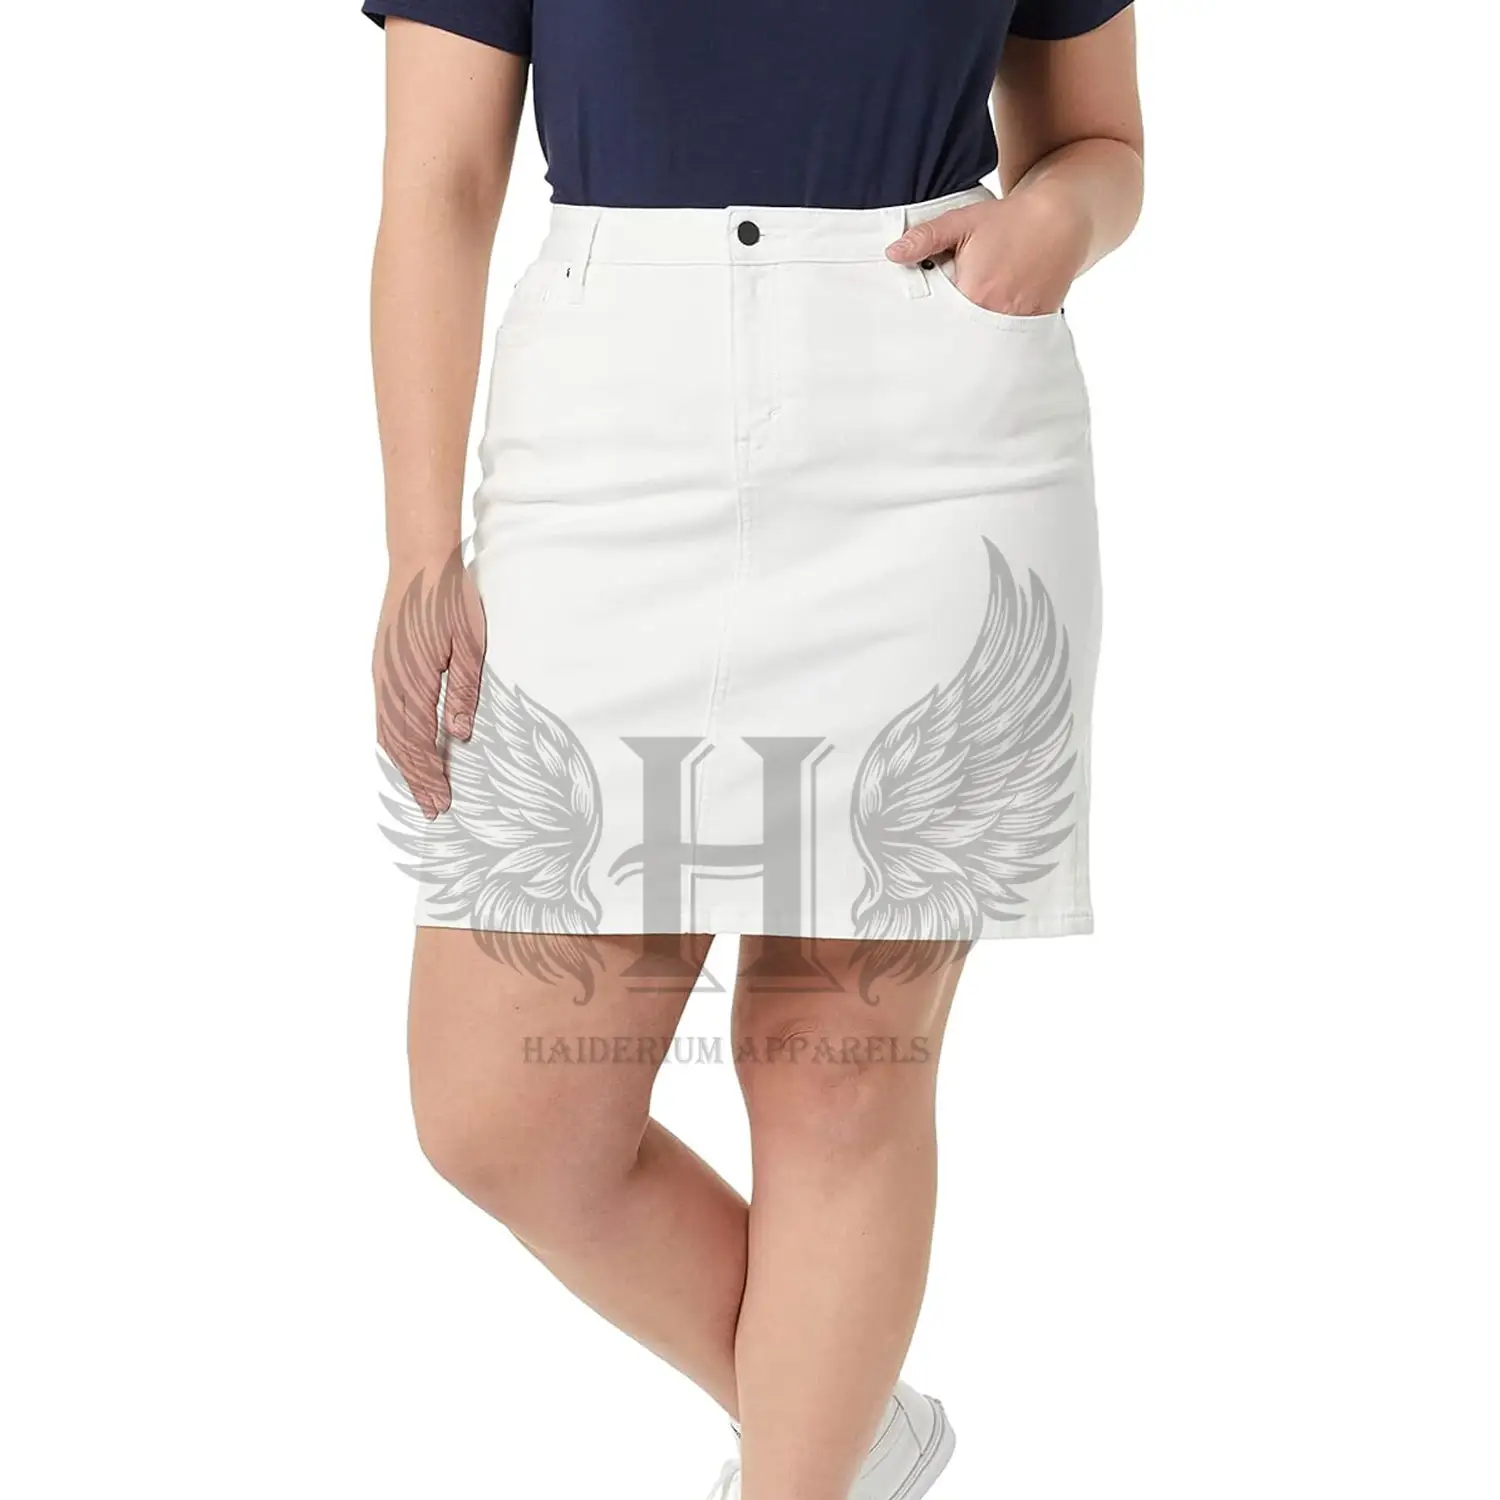 Women's Classic 5-Pocket Denim Skirt with Comfortable High Stretch Denim - Classic Fit for Timeless Style